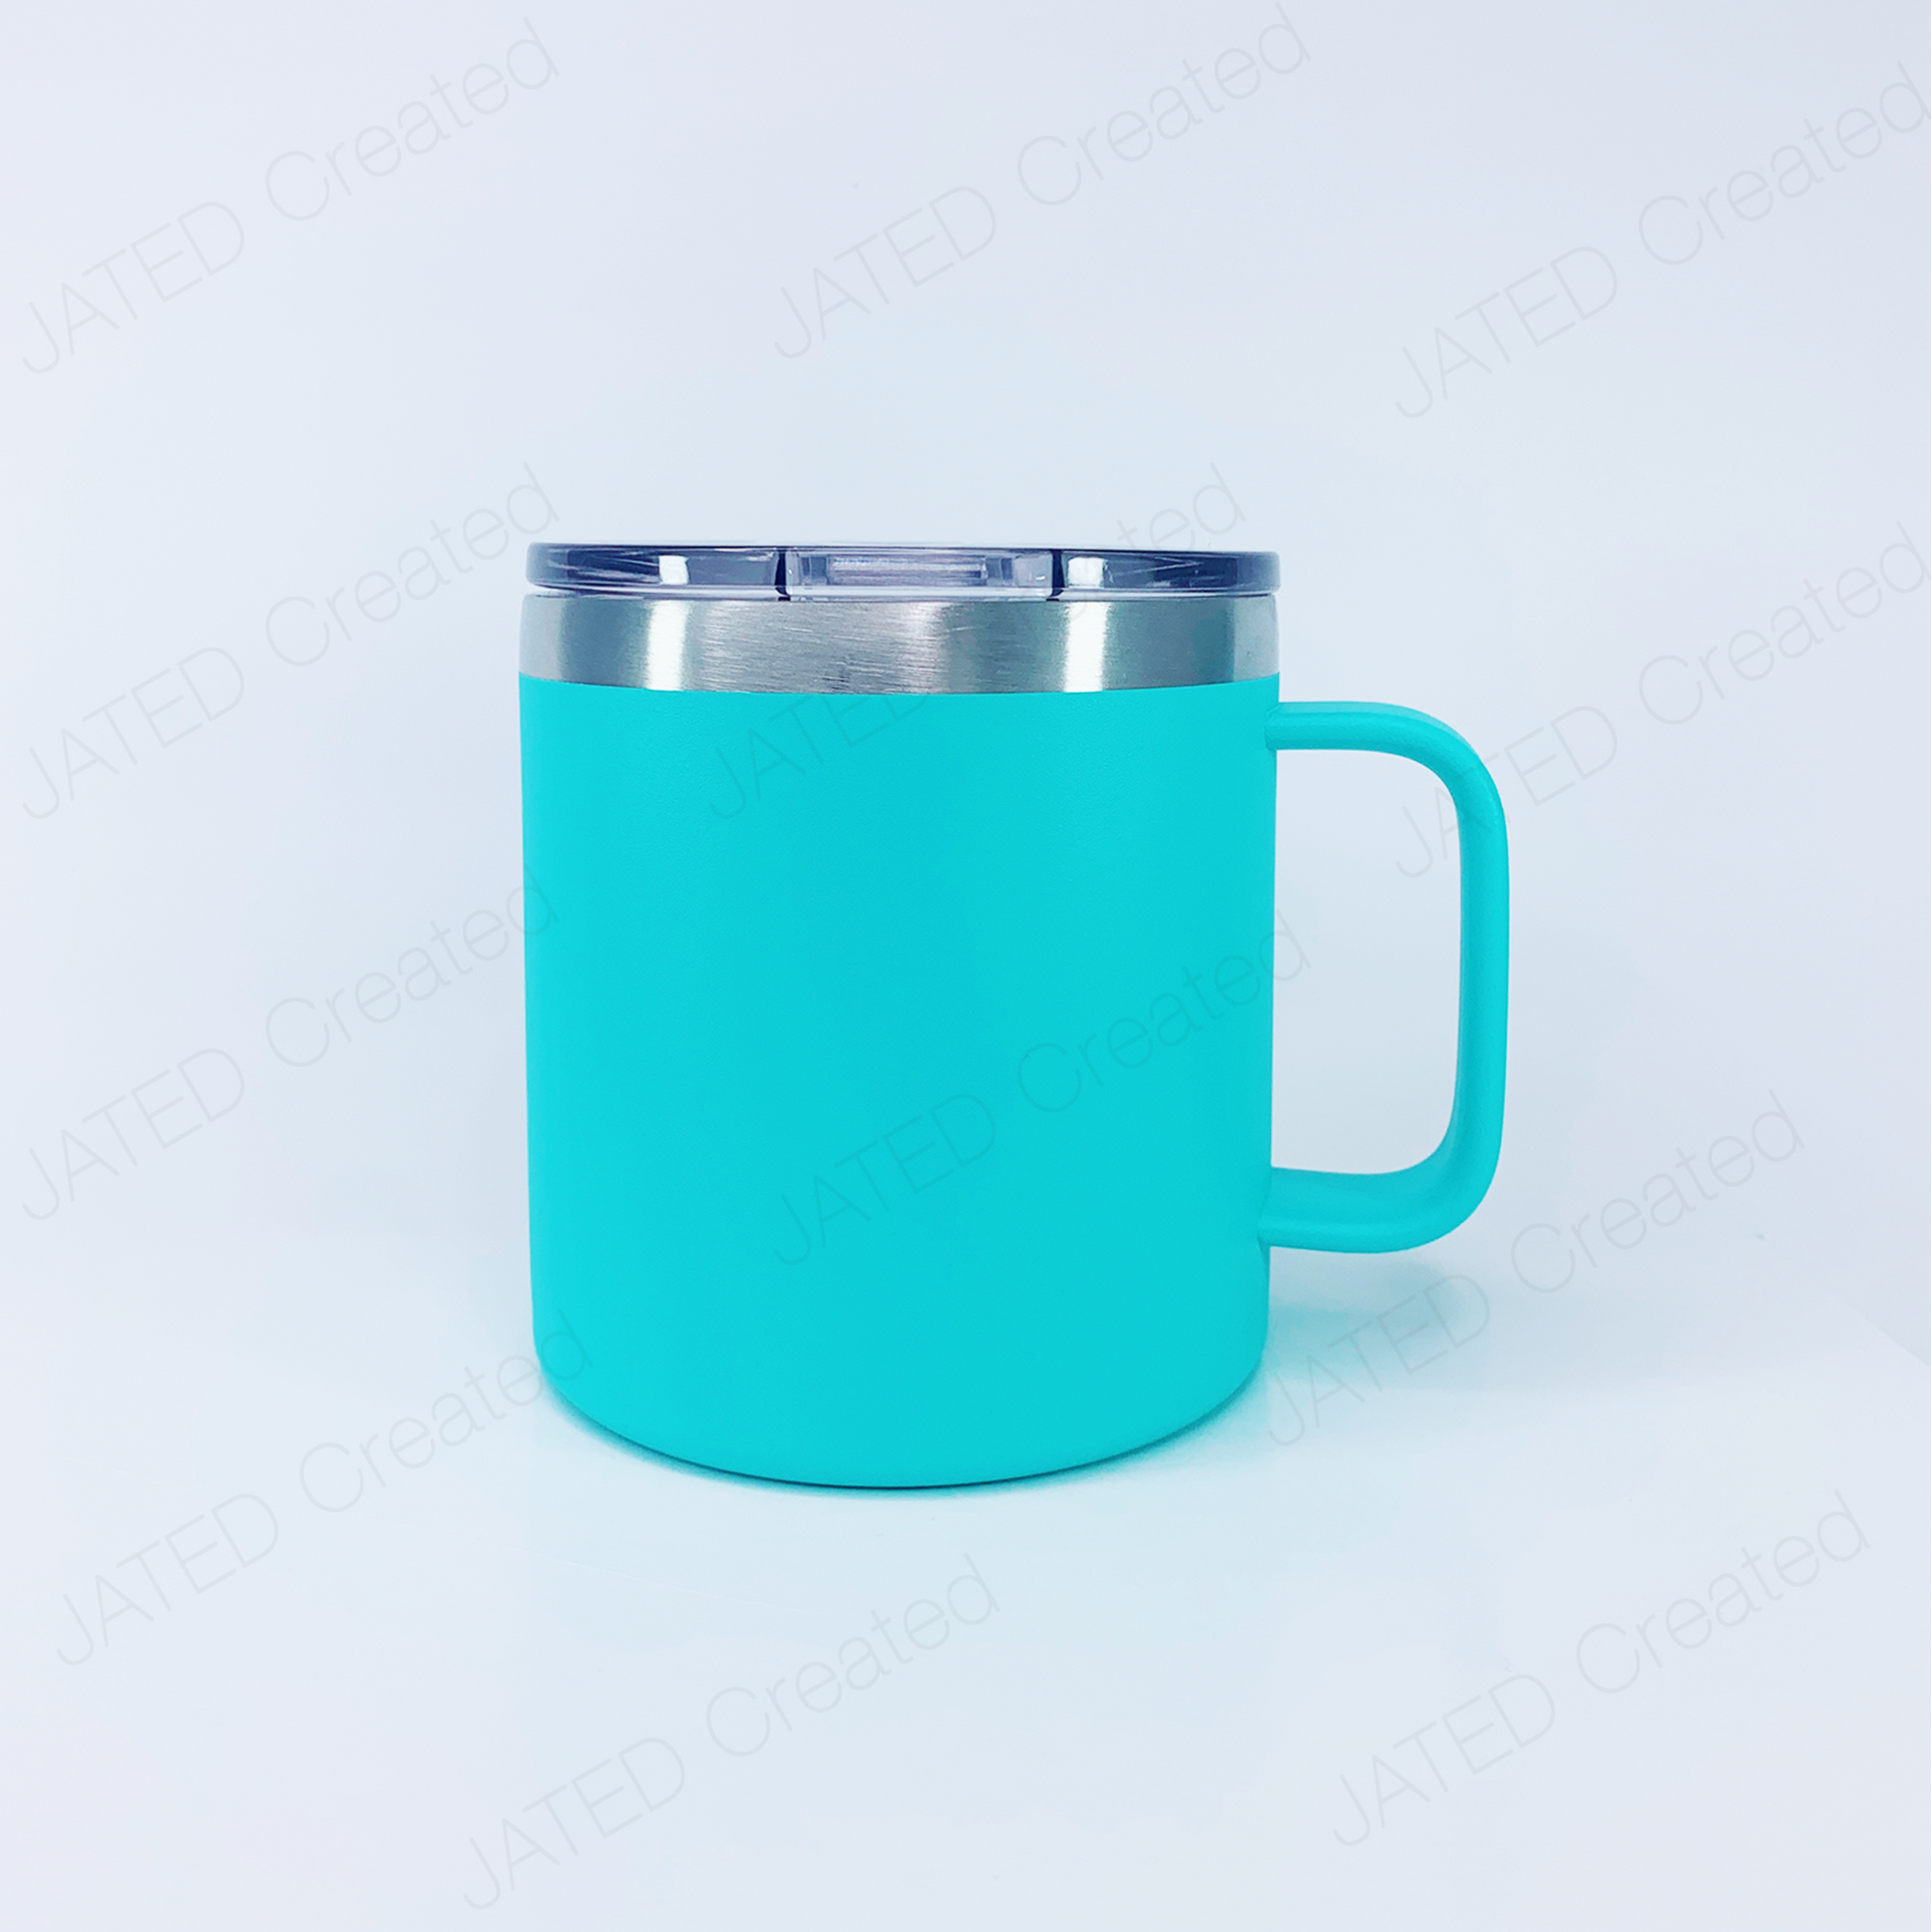 14 oz Powder Coated Coffee Tumbler in Teal Engraved 14oz JATED Coffee Tumblers Personalized Customized Stainless steel Insulated Laser engraved Double-walled Eco-friendly